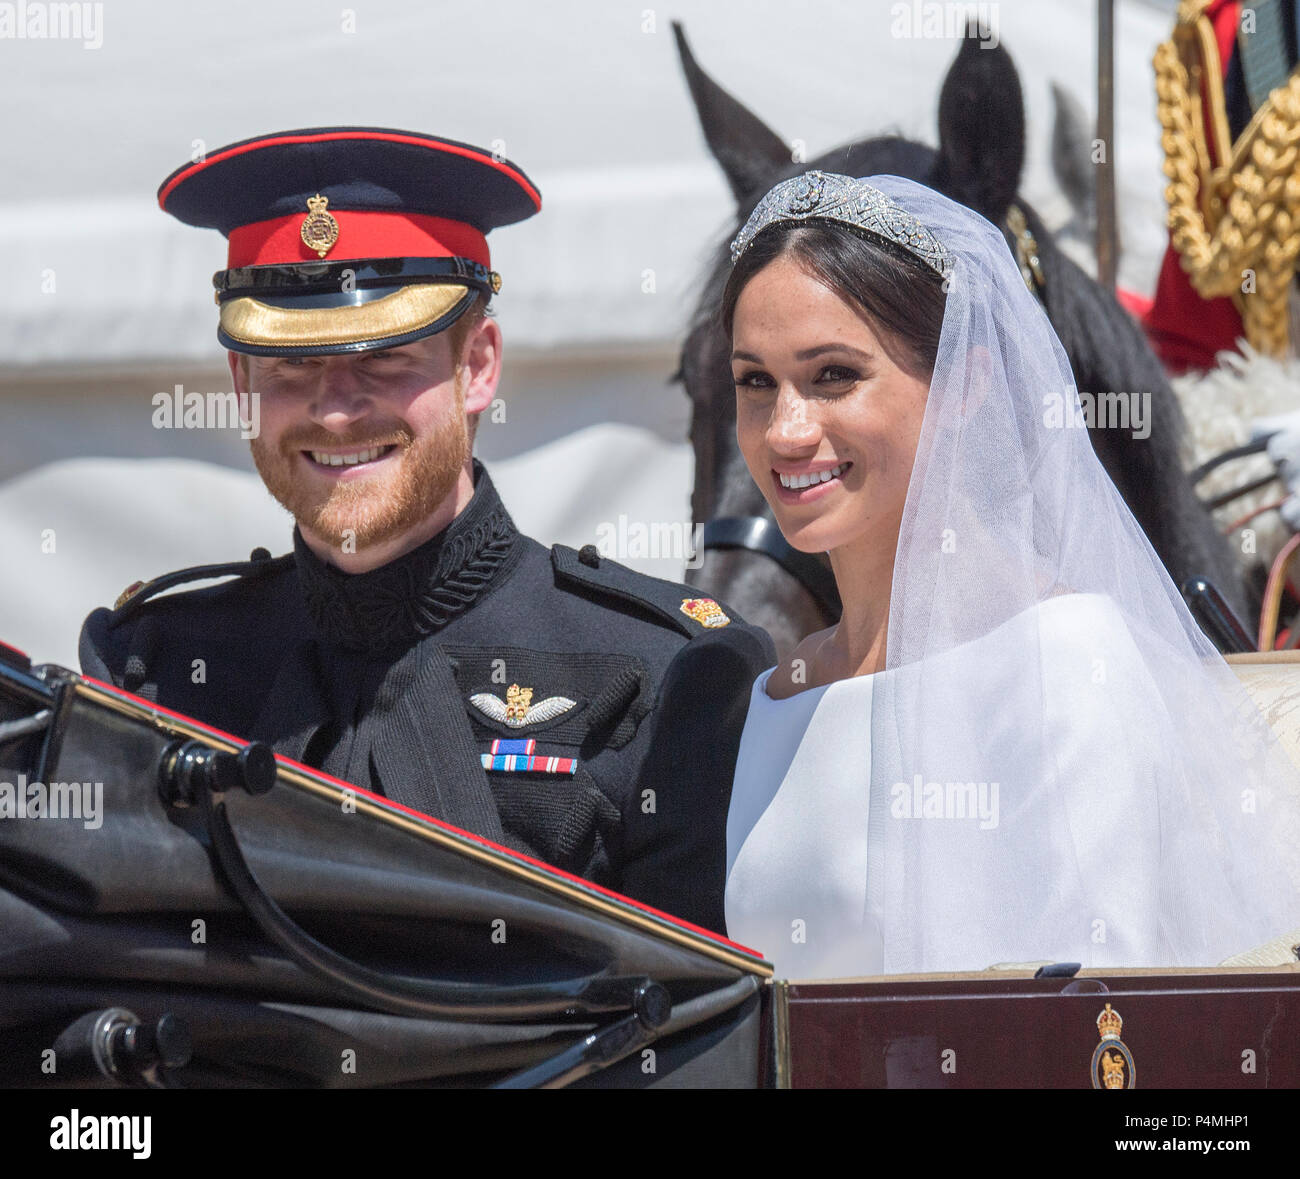 The newly married Duke and Duchess of Sussex depart Windsor Castle in the Ascot Landau carriage during the procession after getting married St George's Chapel, Windsor Castle on May 19, 2018 in Windsor, England.   Prince Henry marries Ms. Meghan Markle in a service at St George's Chapel inside the grounds of Windsor Castle. Stock Photo